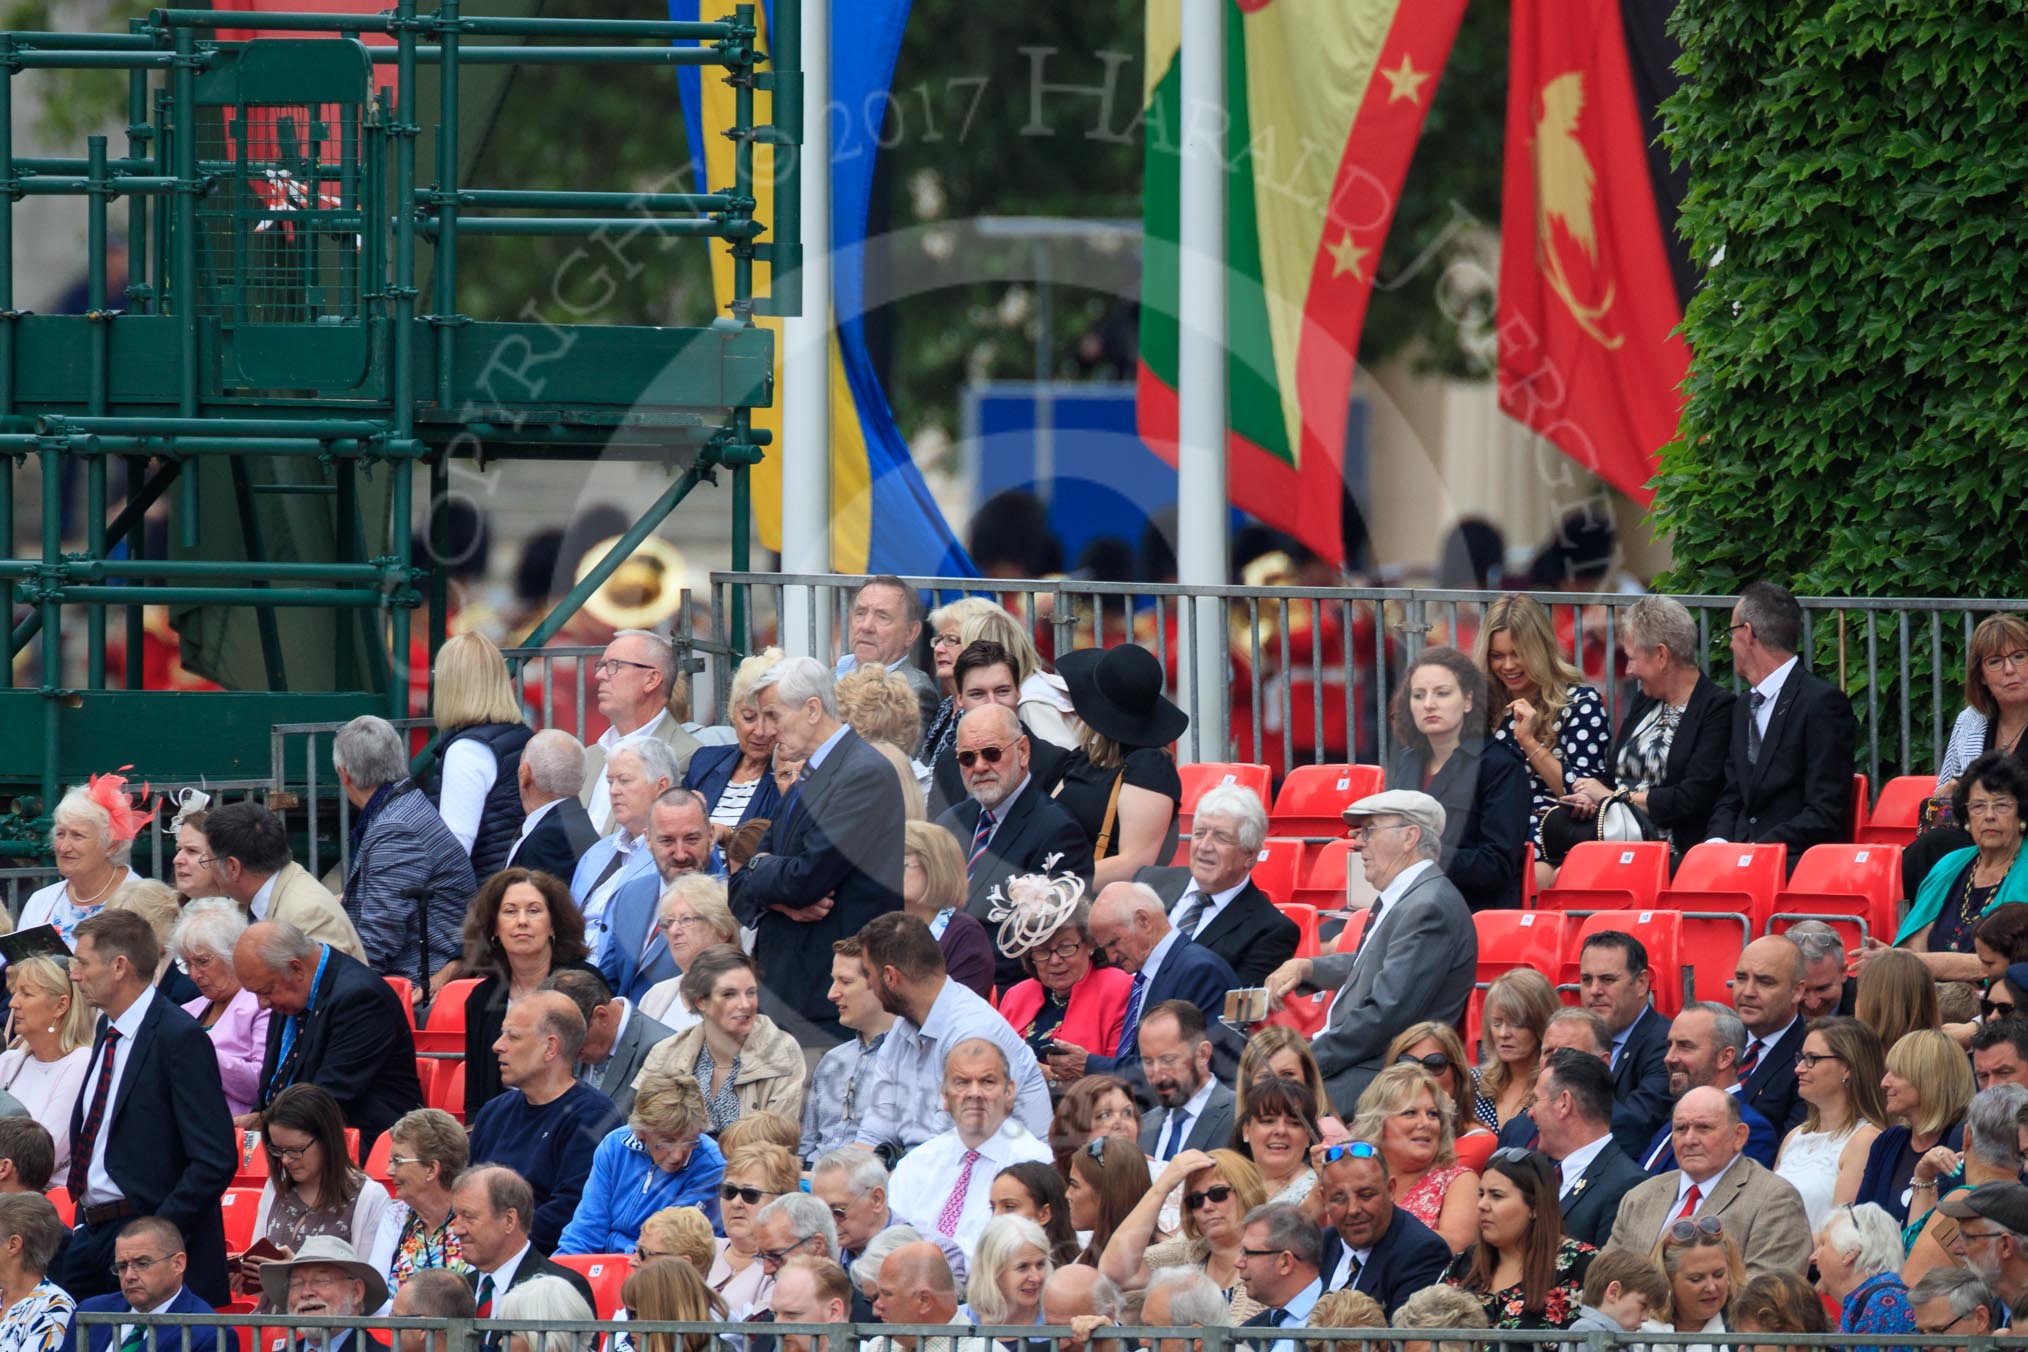 Spectators on the A grandstand, with the Band of the Welsh Guards in the background, turning from The Mall to Horse Guards Parade during The Colonel's Review 2018 (final rehearsal for Trooping the Colour, The Queen's Birthday Parade)  at Horse Guards Parade, Westminster, London, 2 June 2018, 10:10.